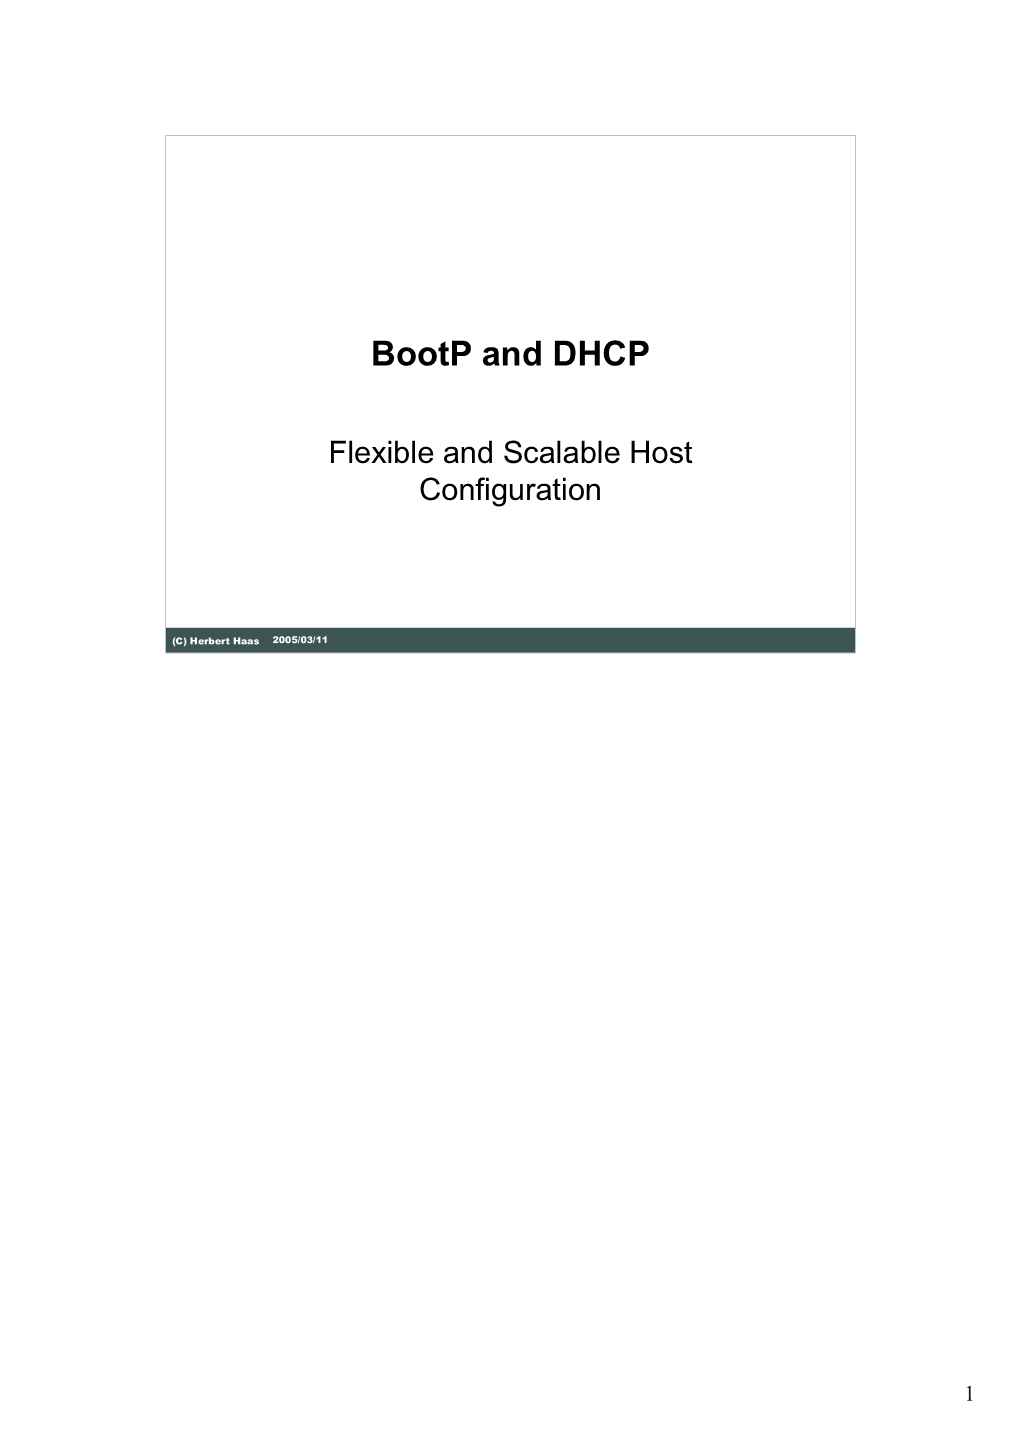 Bootp and DHCP